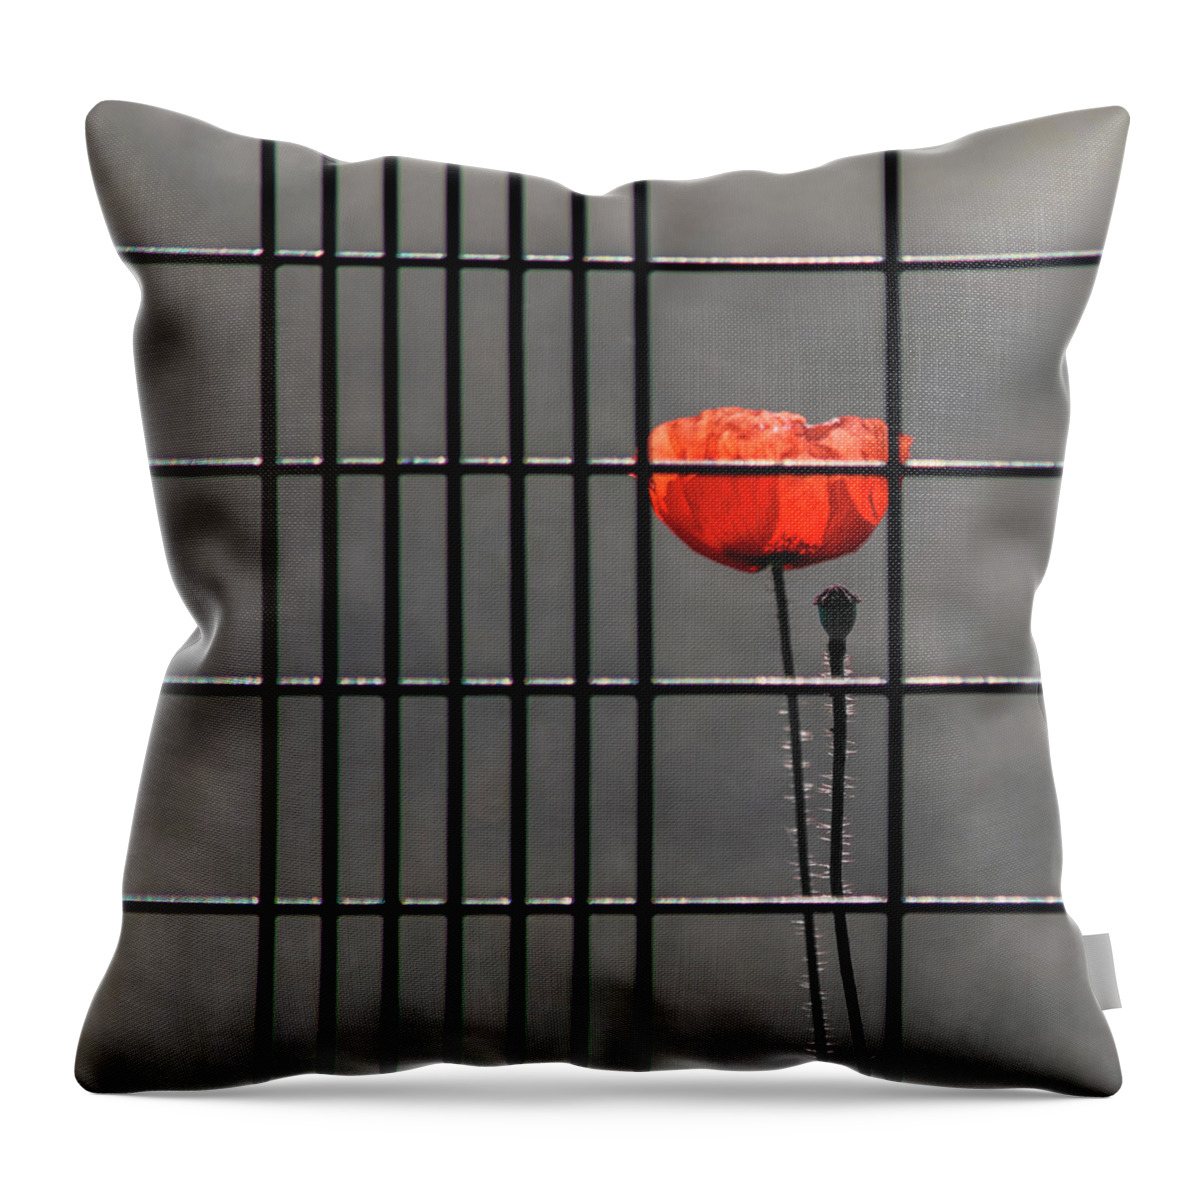 Poppy Throw Pillow featuring the photograph Square - Imprisoned Poppy by Stuart Allen